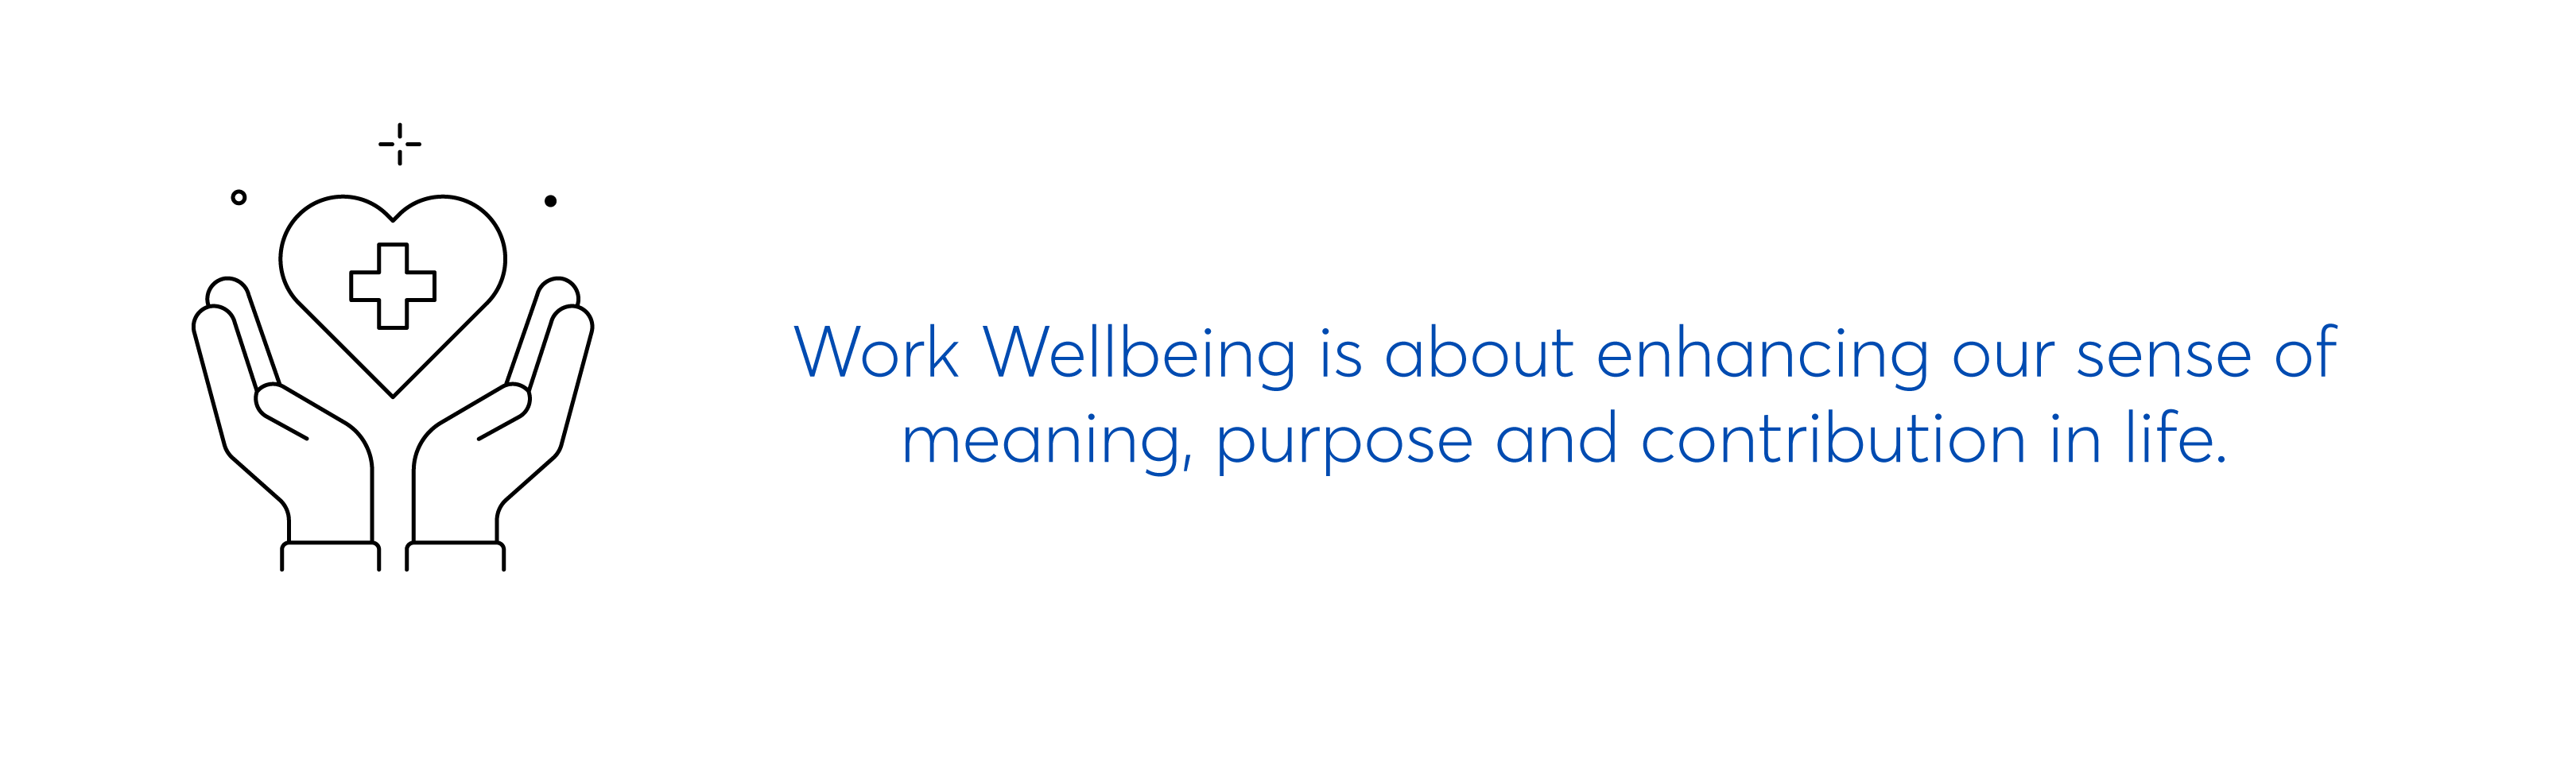 Wellbeing is about enhancing purpose